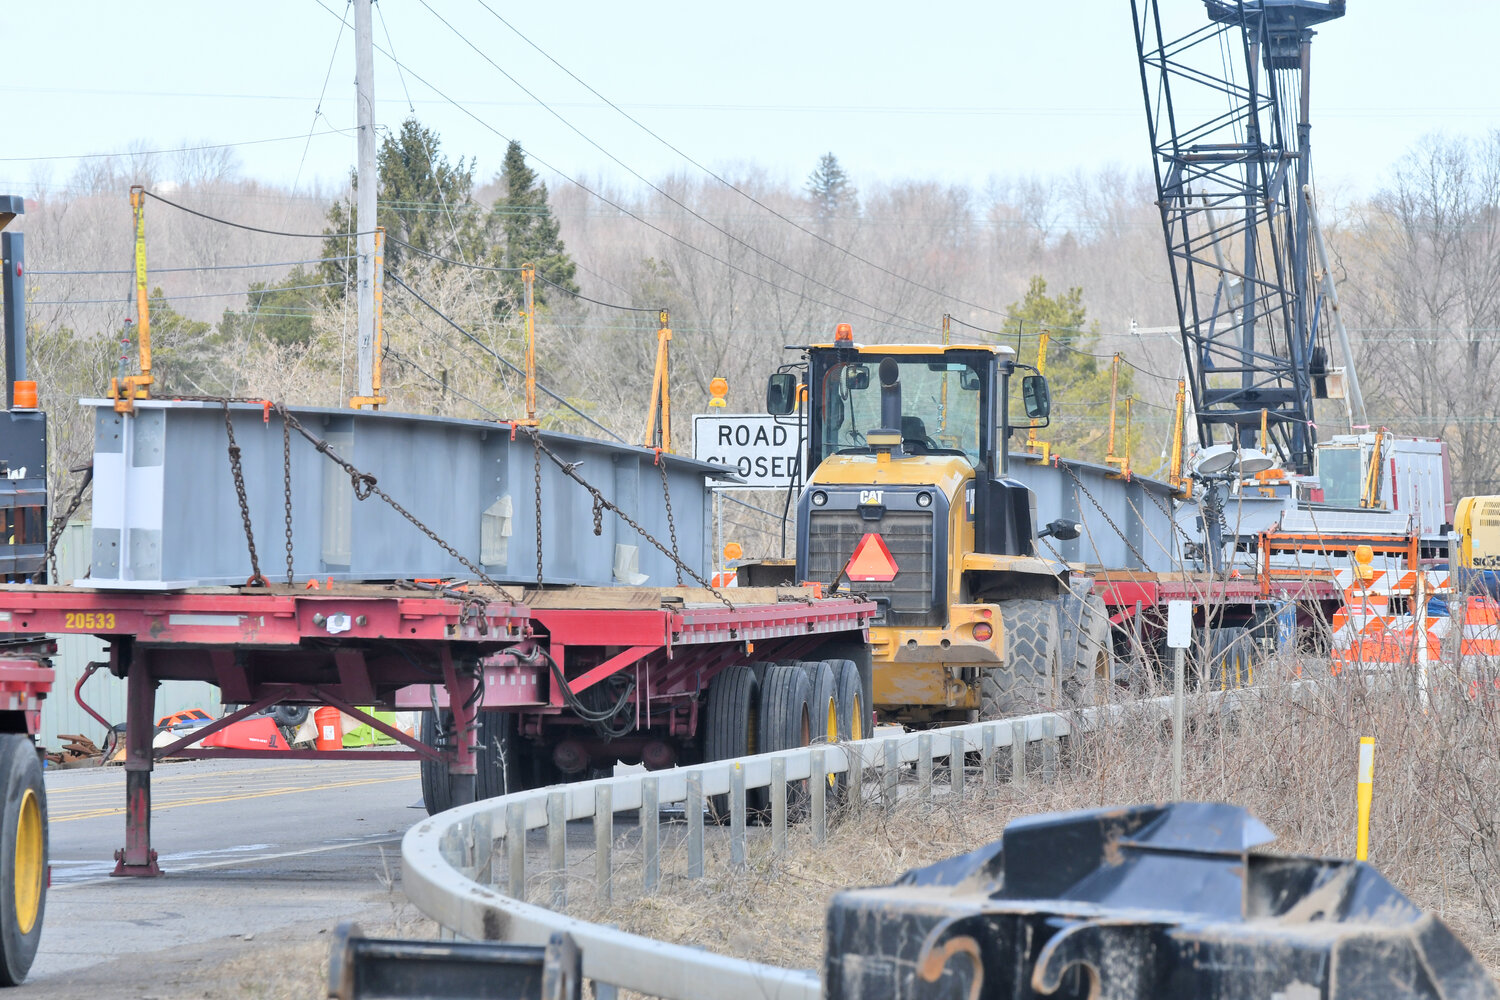 Steel beams ready for installation to complete the span over the NYS Thruway so that Judd Road can be opened up again. Photo taken on Thursday, March 30.